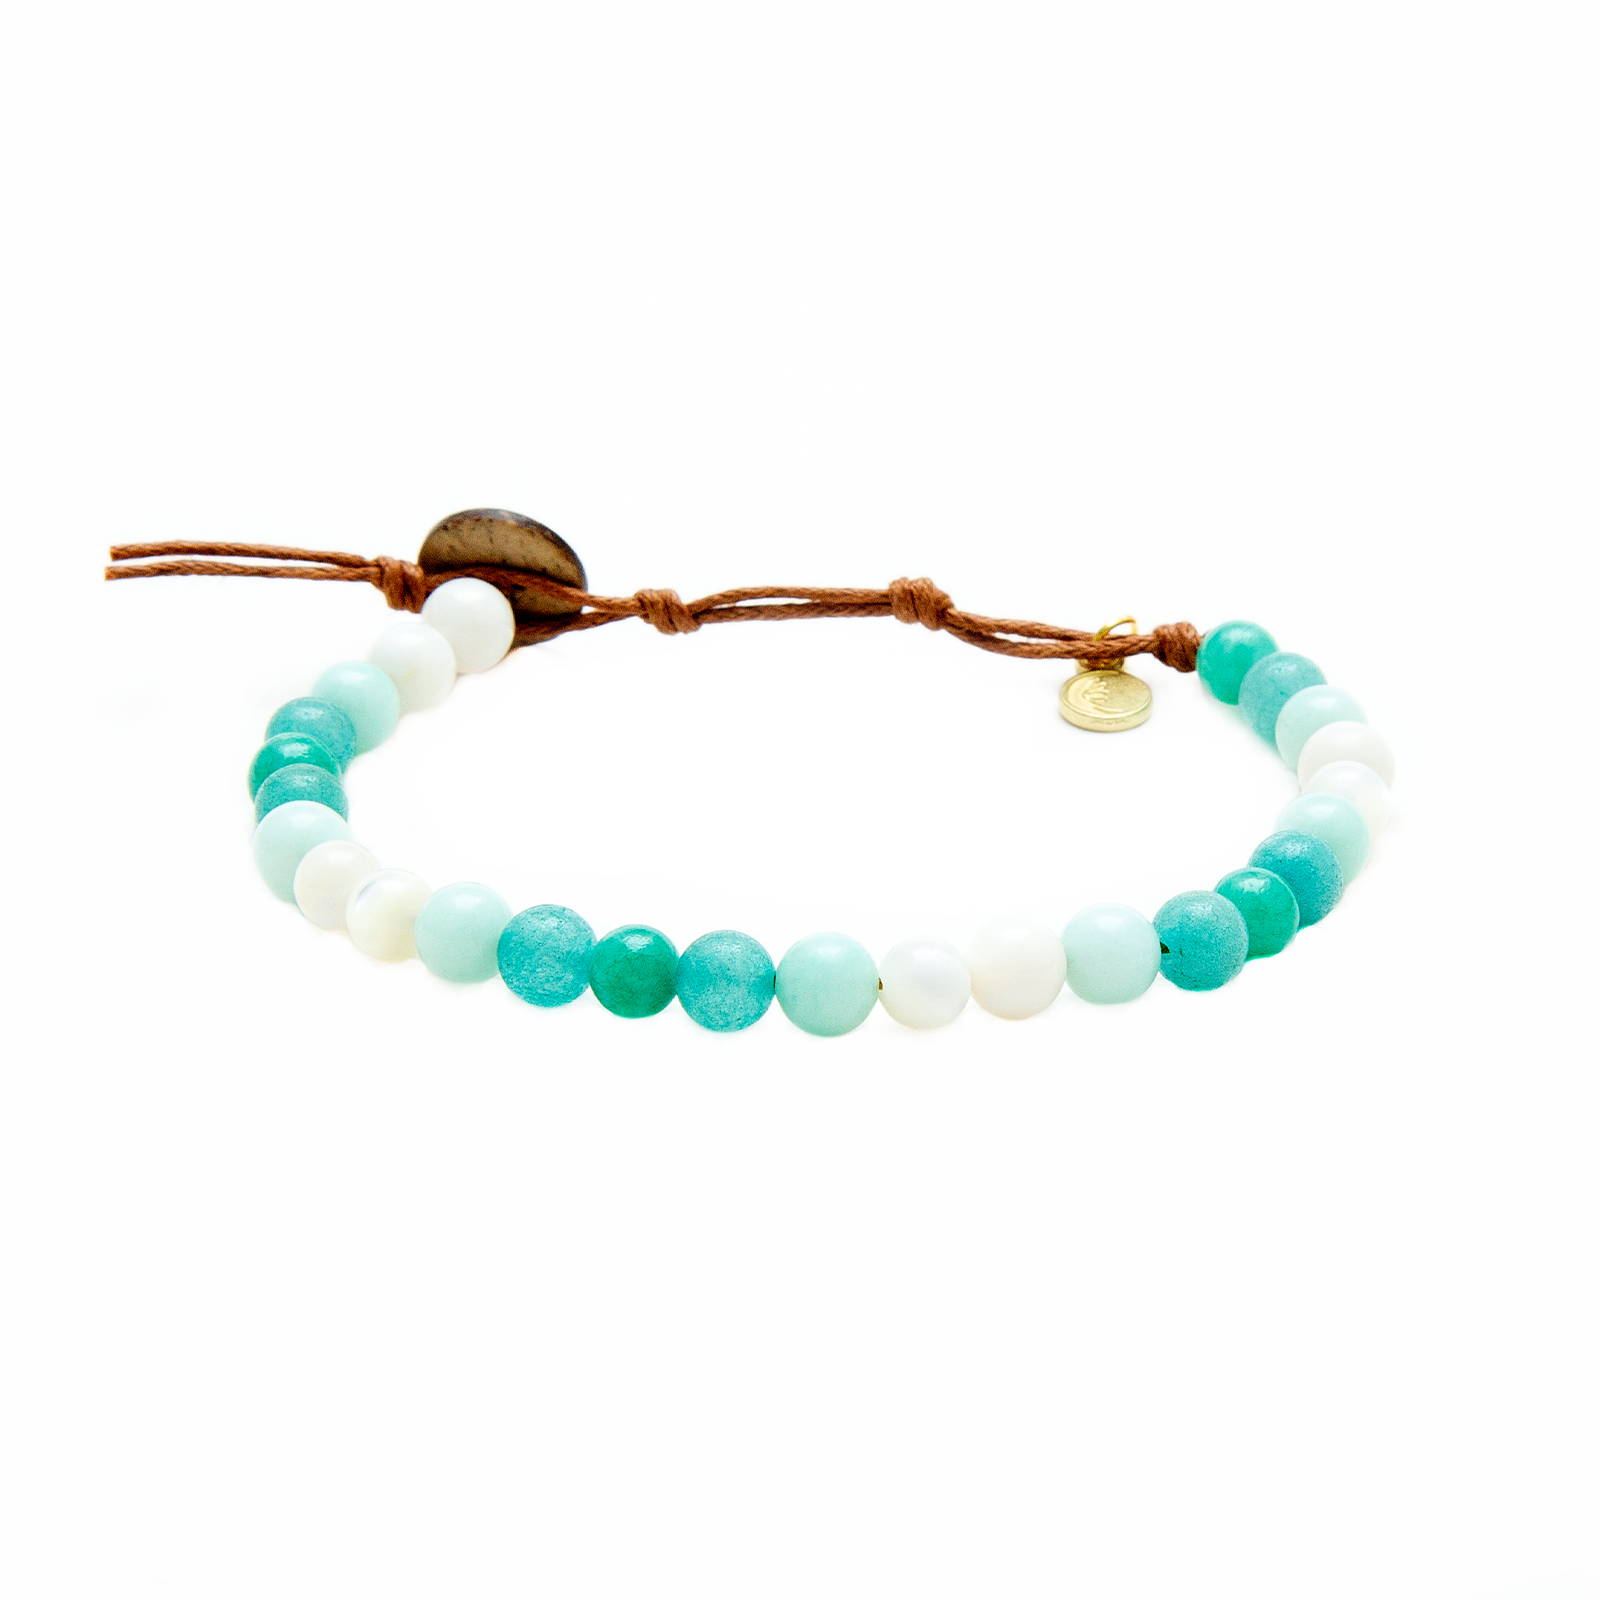 White and Teal Amazonite Bracelet with Cotton Cord